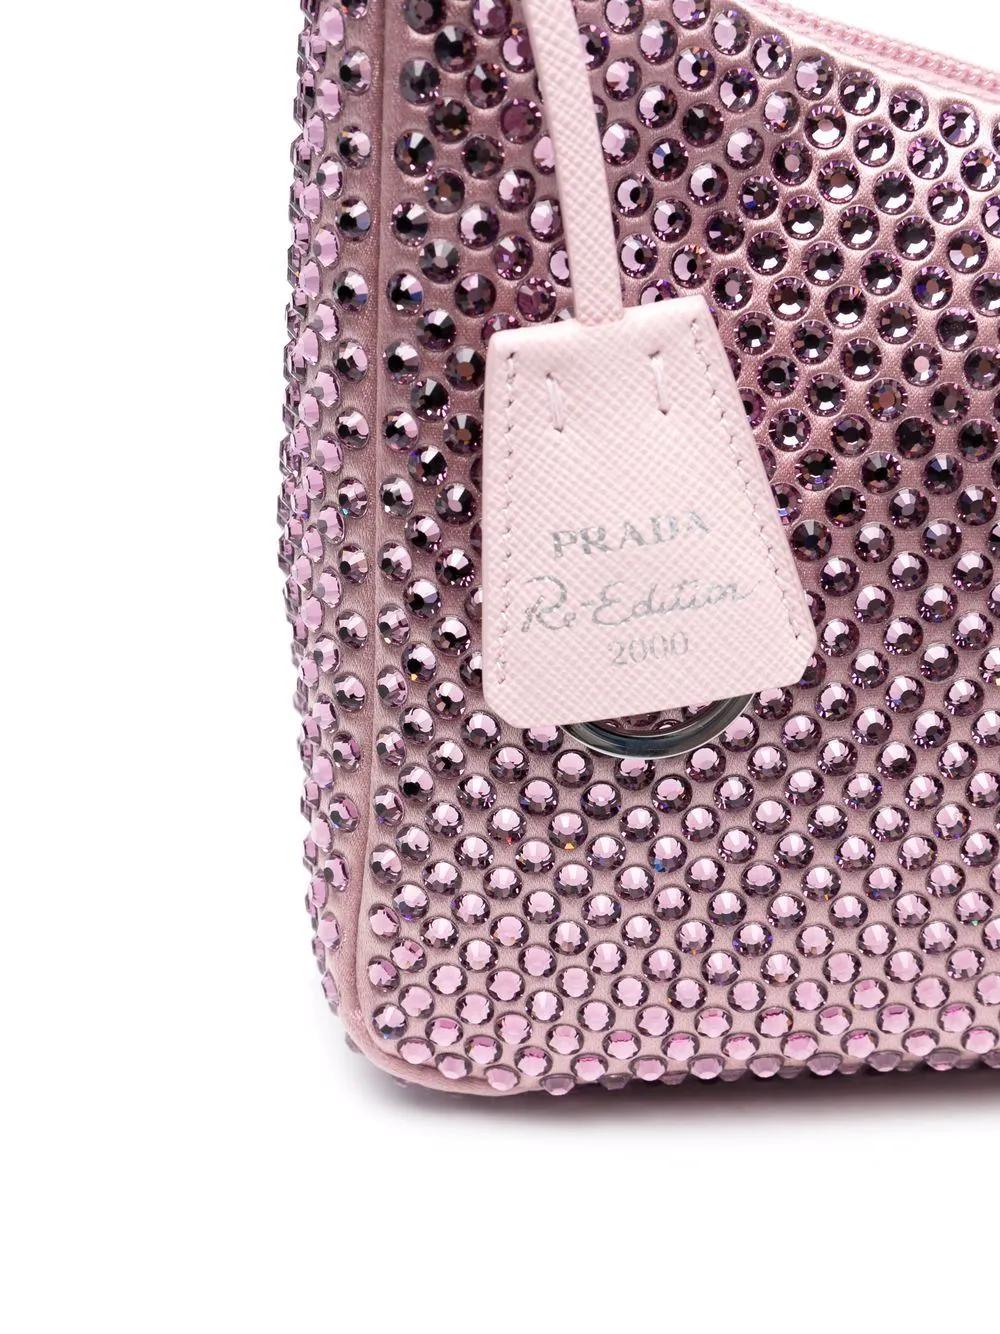 Prada's Re-Edition 2005 Bag Reimagines the Aughts Aesthetic